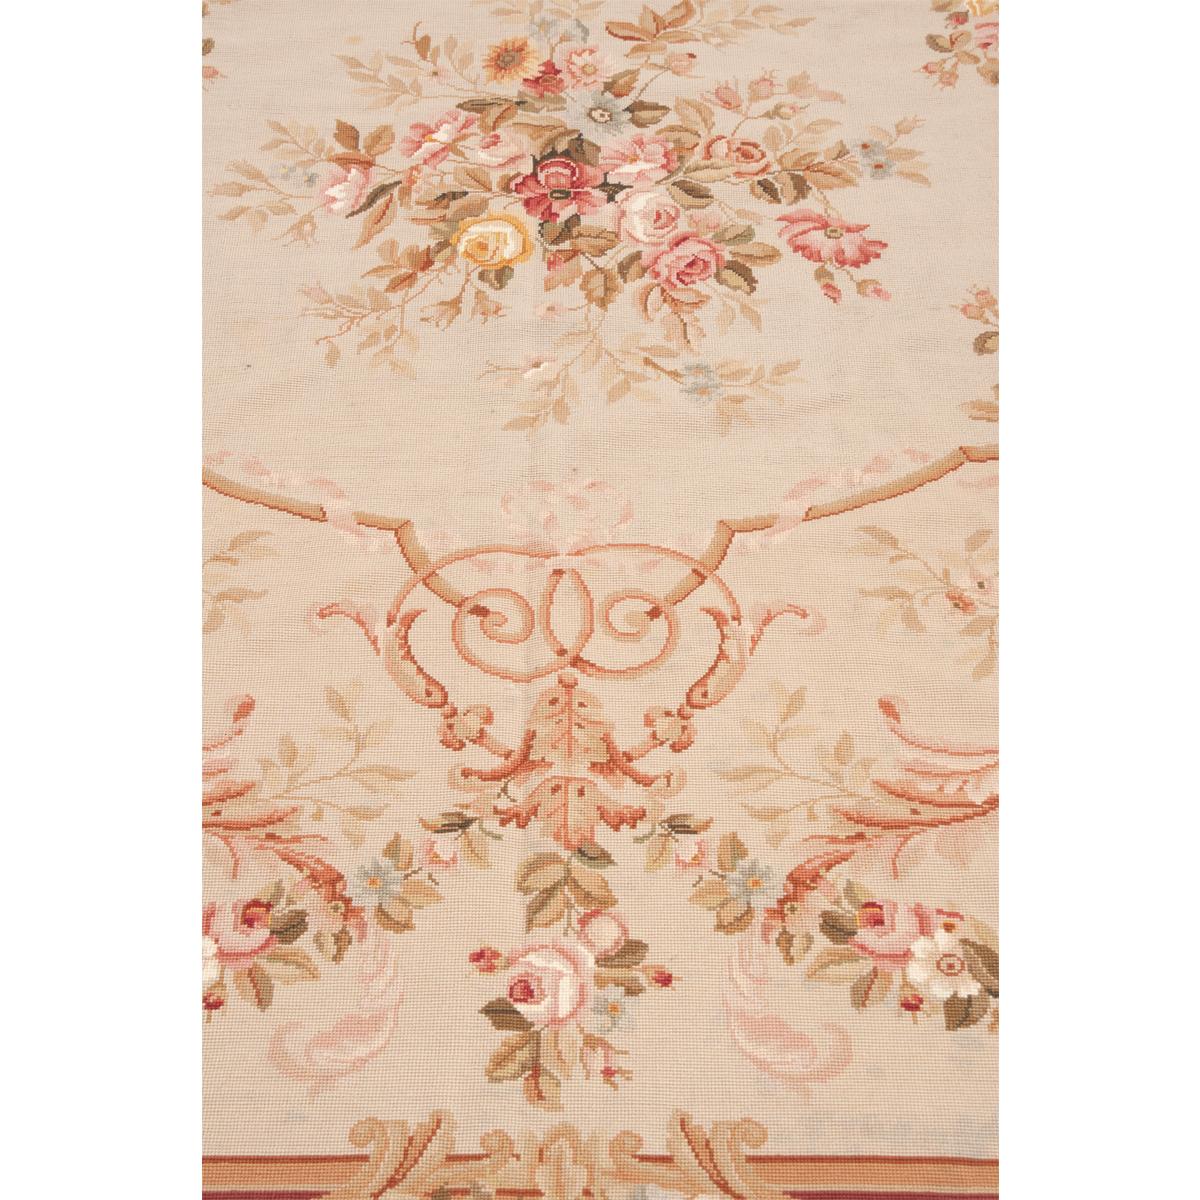 Beautiful example of an Aubusson rug. A fantastic display of floral and scroll designs, handwoven from France. Tons of earth tone colors: browns, greens, beiges, rust/reds, mauve/pinks and more are all in soft shades. See detailed pictures for